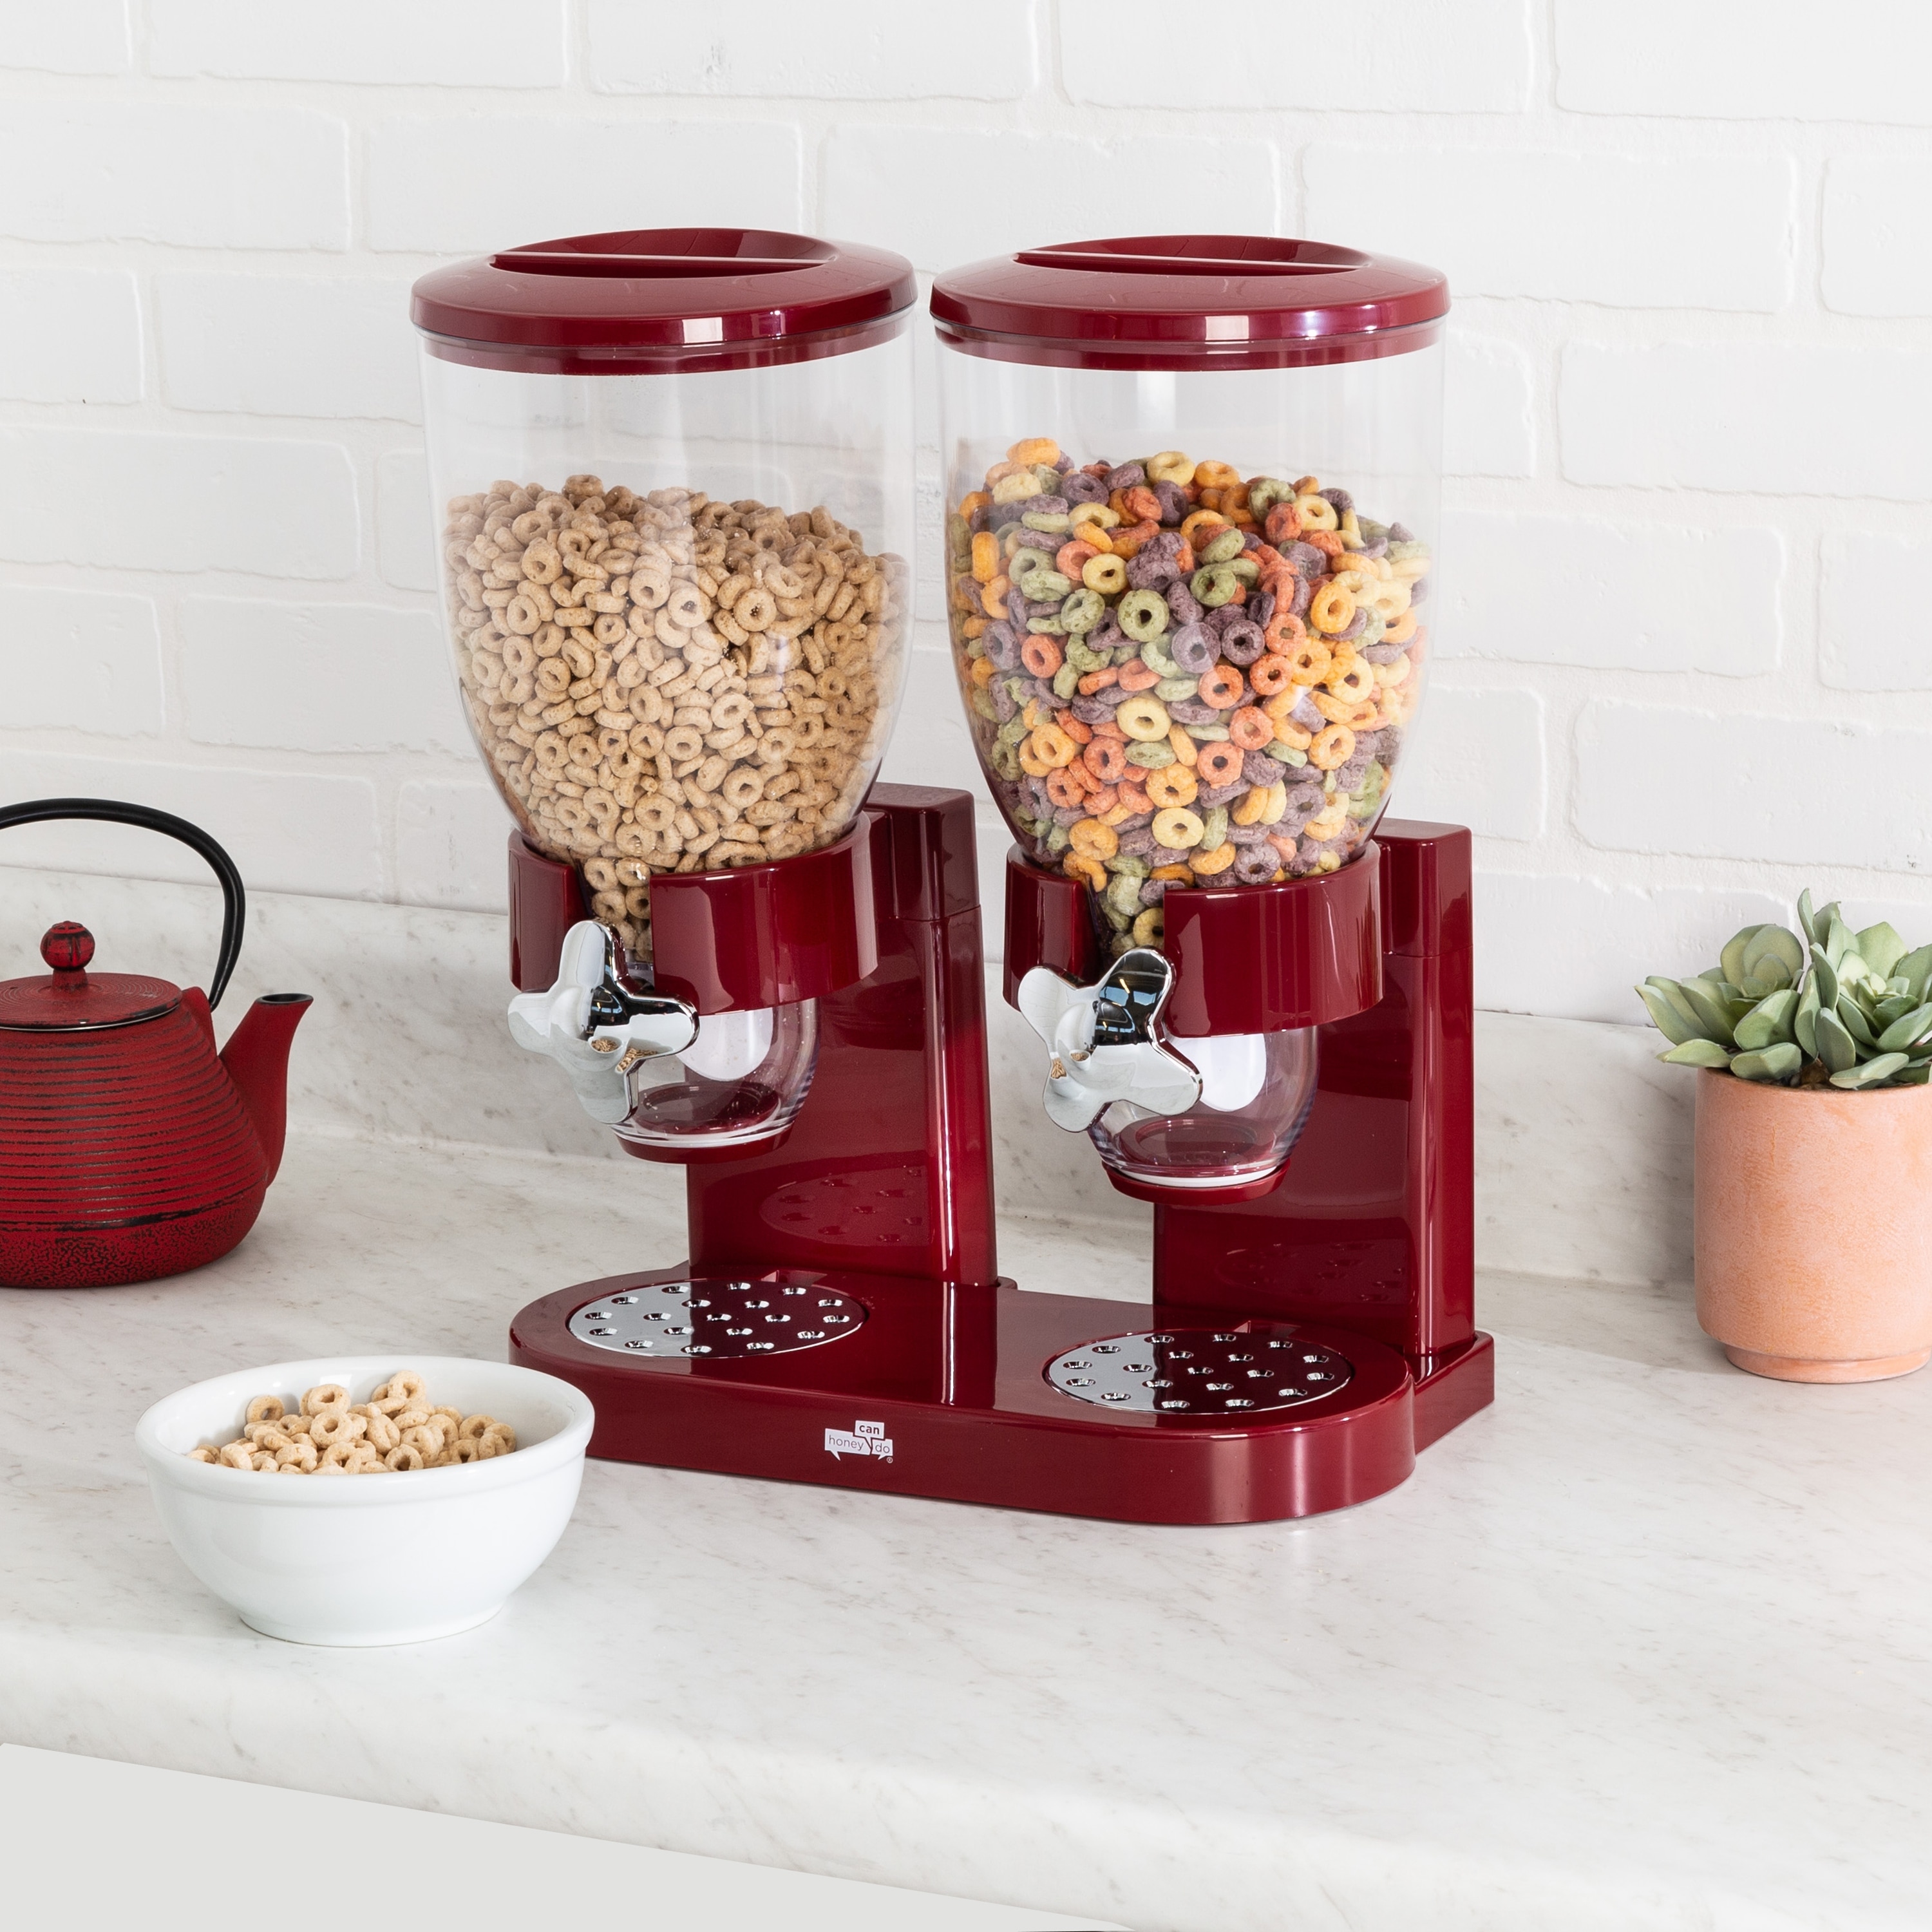 https://ak1.ostkcdn.com/images/products/is/images/direct/36f23101104e43f24245226763217562fda2265a/Honey-Can-Do-Red-Double-Dry-Food-Dispenser-with-Portion-Control.jpg